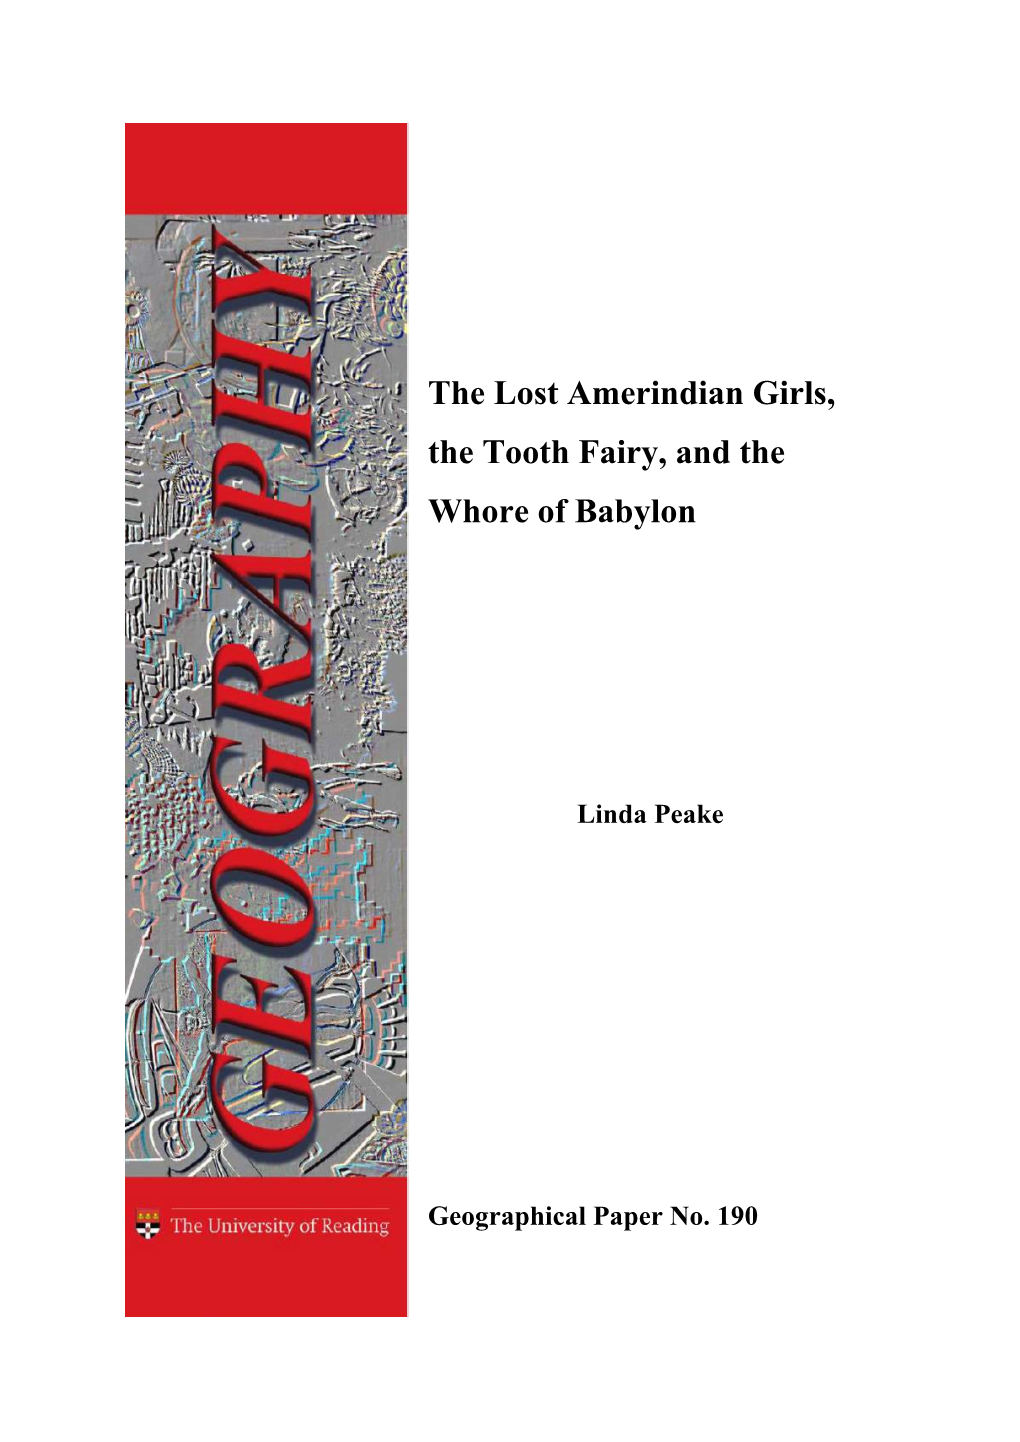 The Lost Amerindian Girls, the Tooth Fairy, and the Whore of Babylon